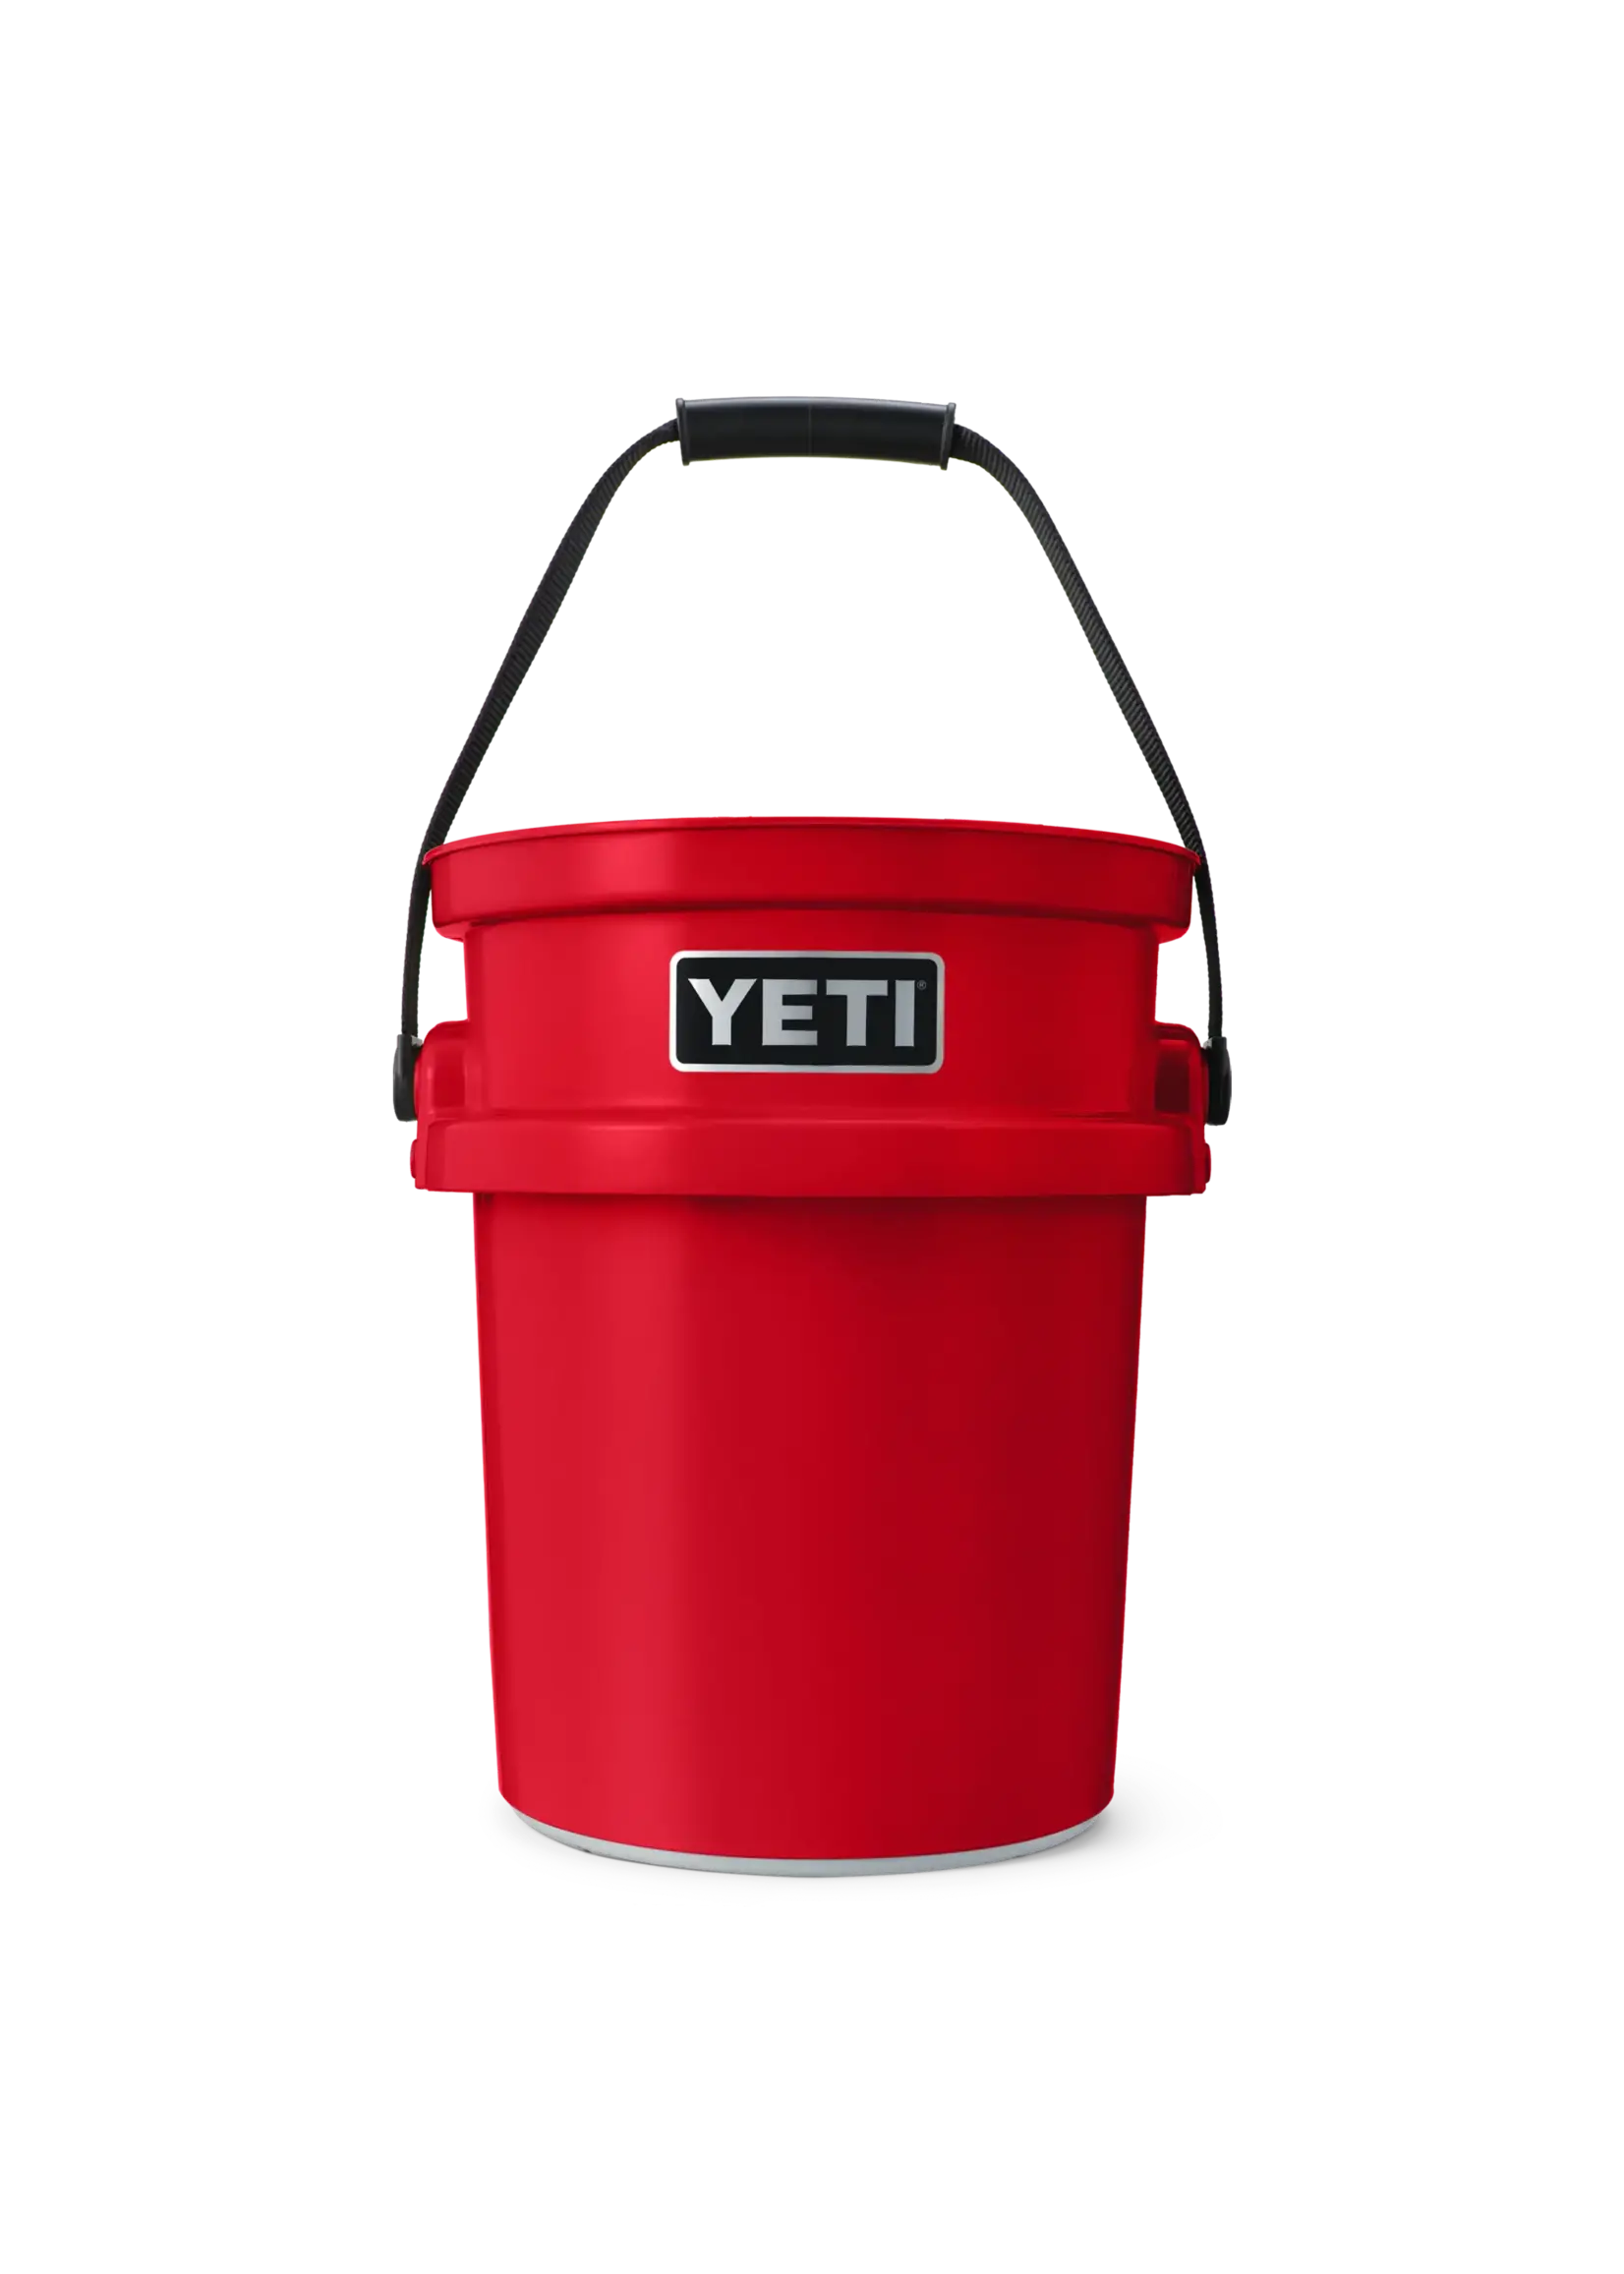 YETI Coolers Loadout Bucket Rescue Red